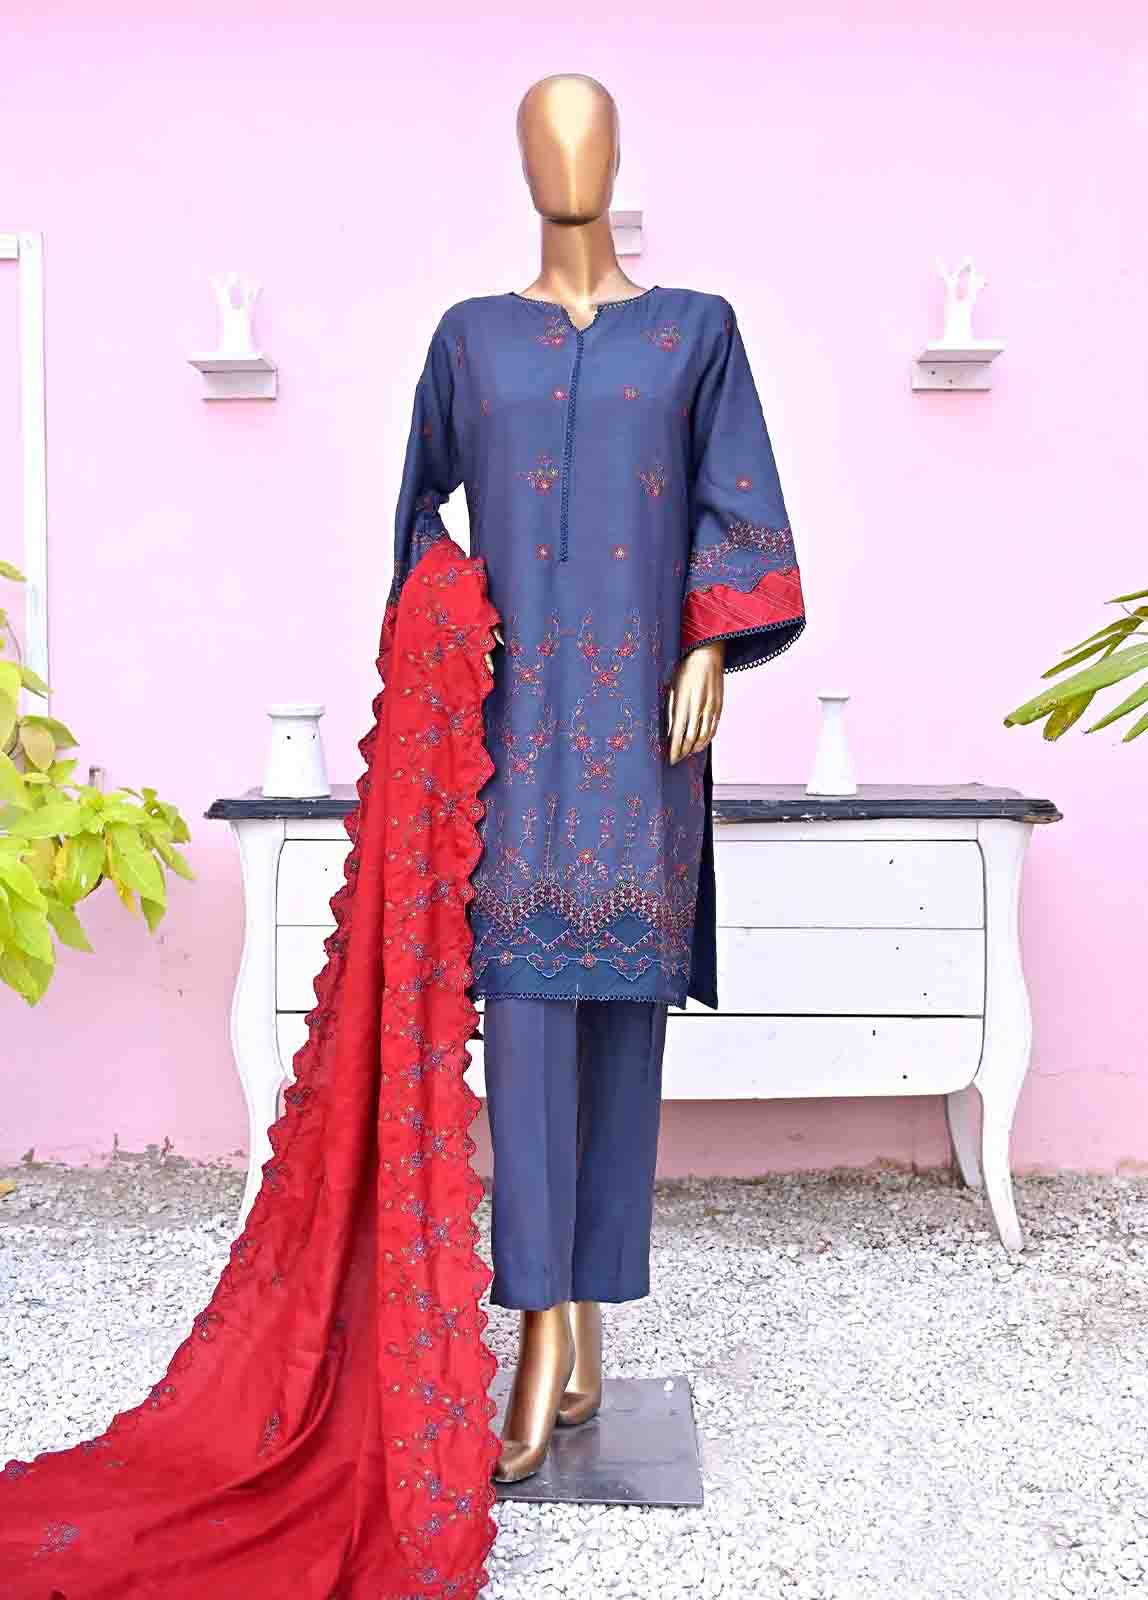 SFB-014-3 Piece Linen Embroidered collection